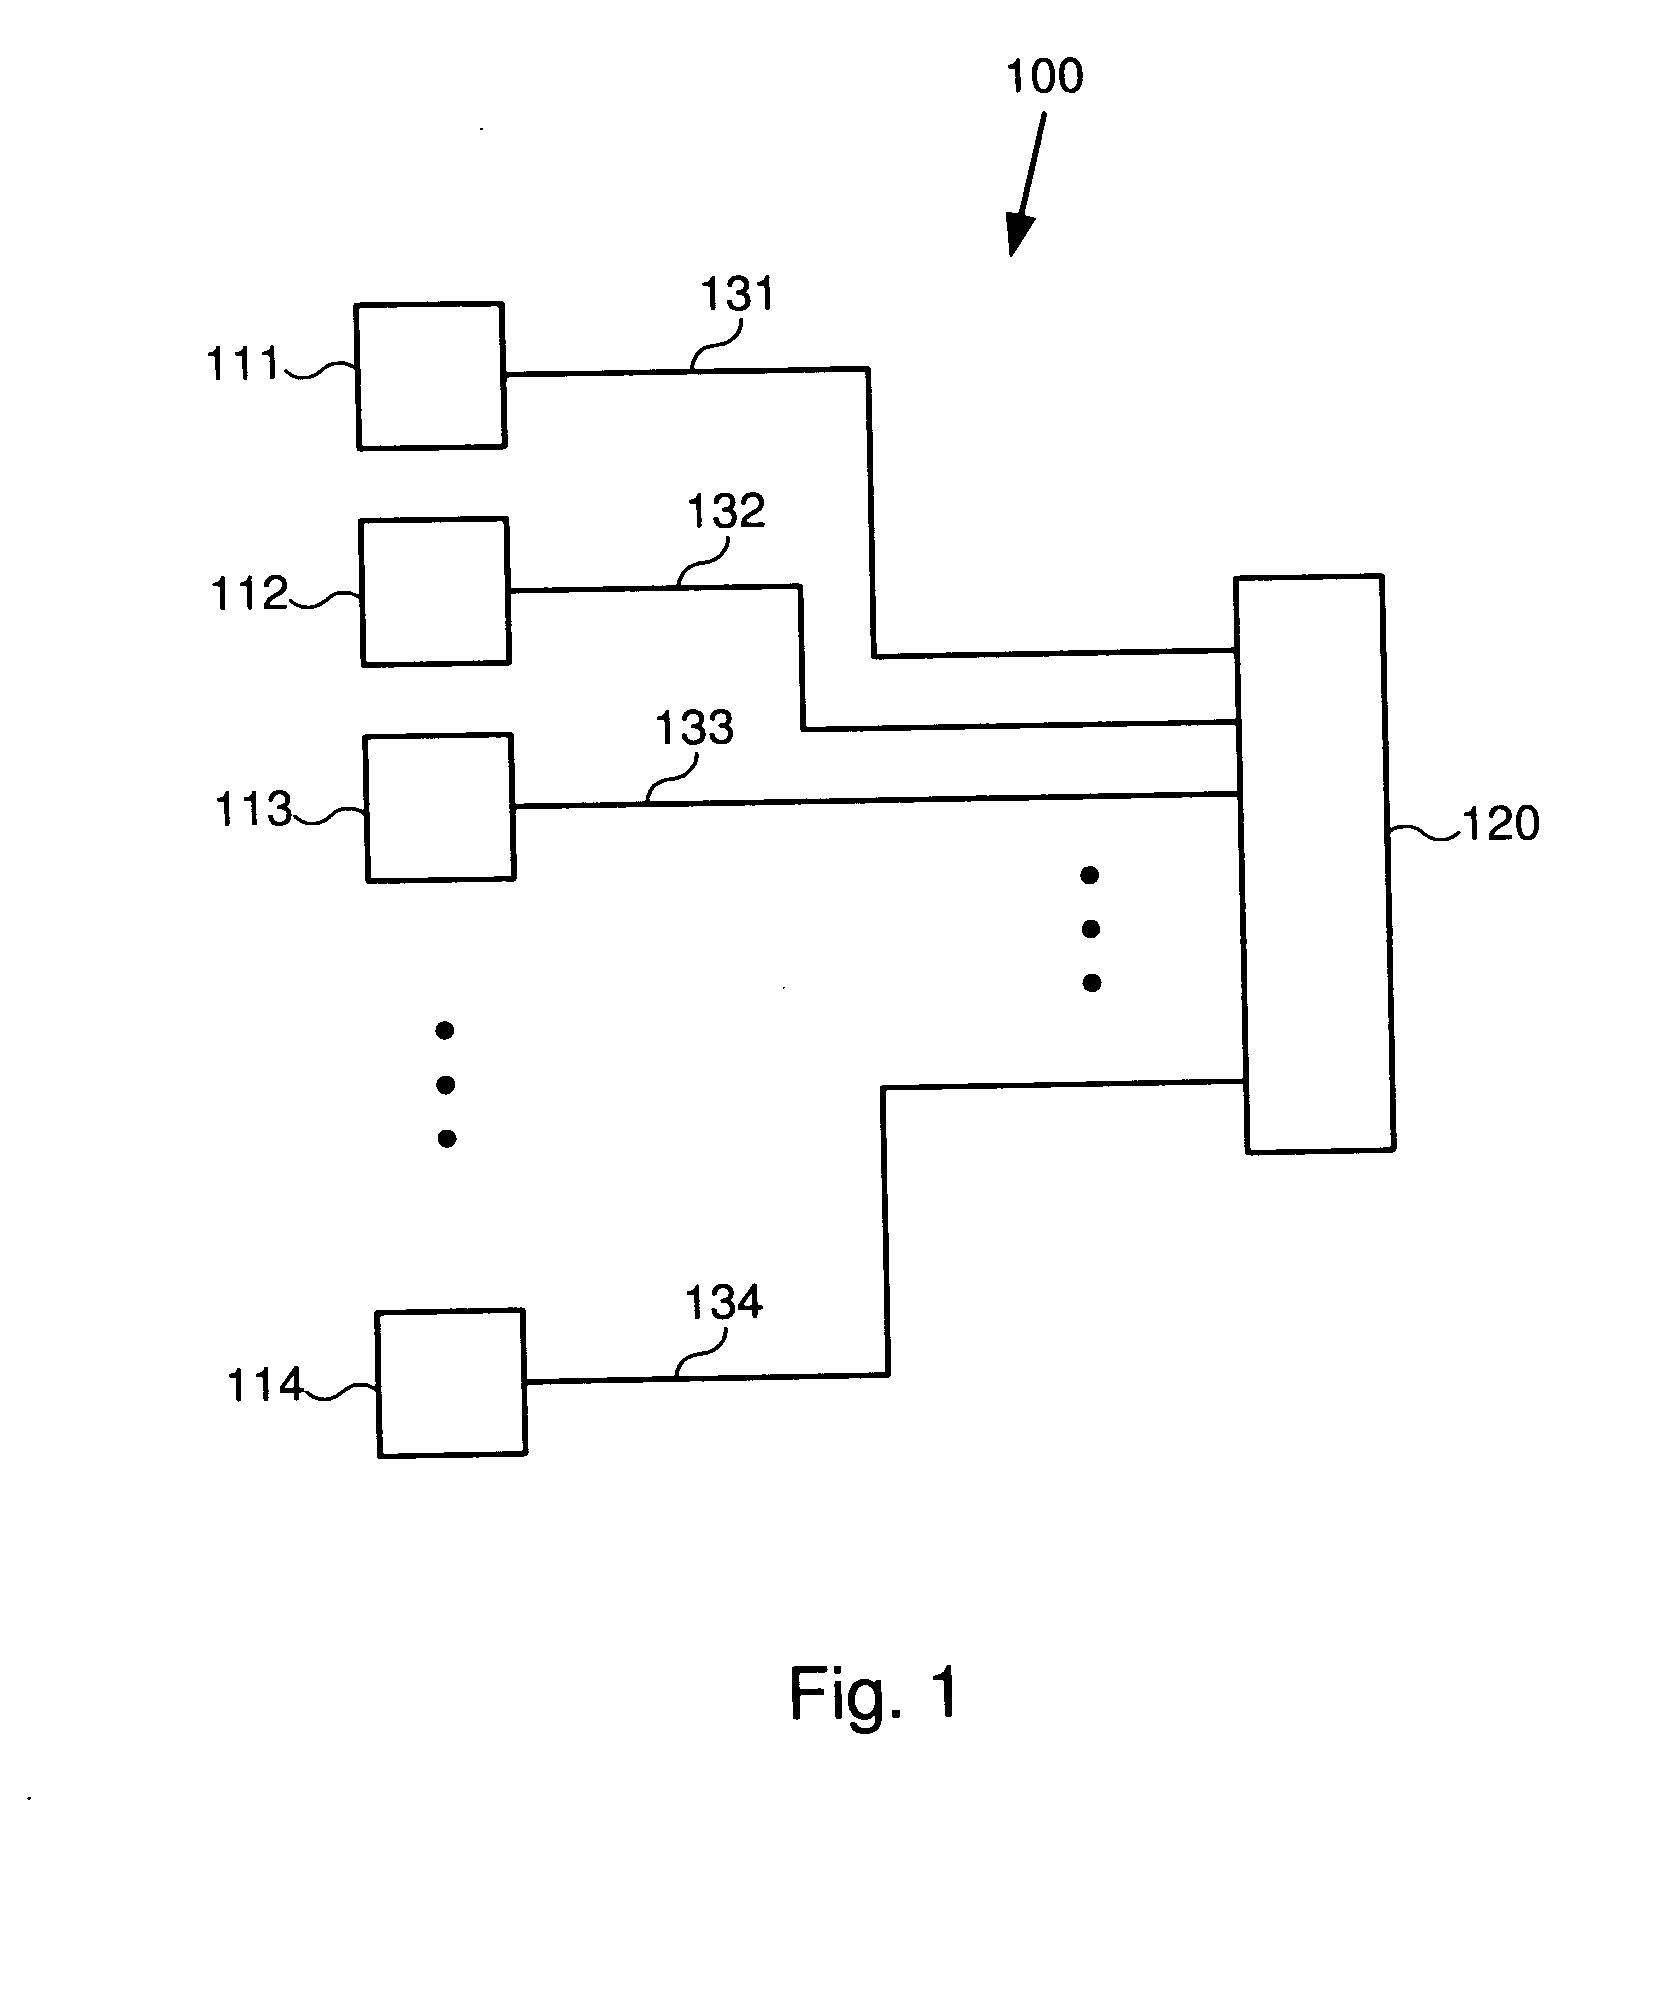 Systems and methods for wiring circuit components